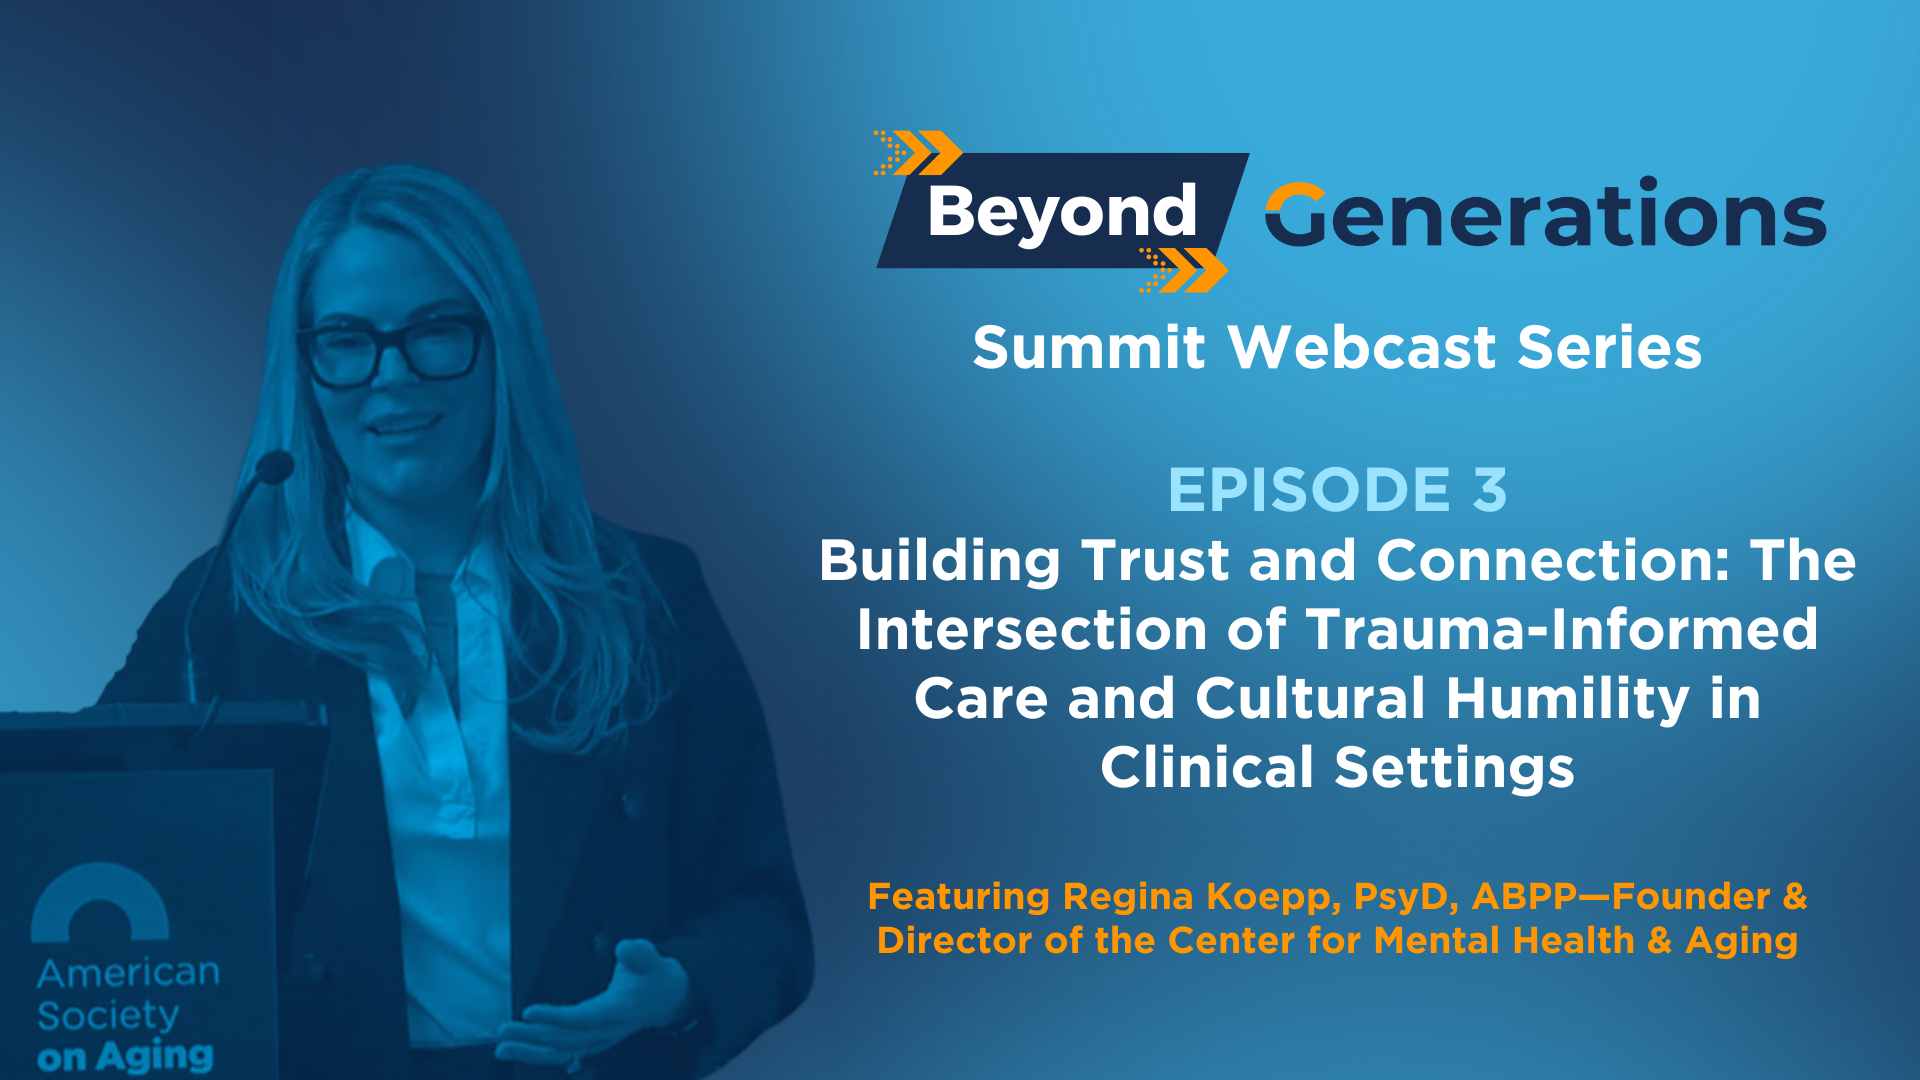 Episode 3: Building Trust and Connection: The Intersection of Trauma-Informed Care and Cultural Humility in Clinical Settings